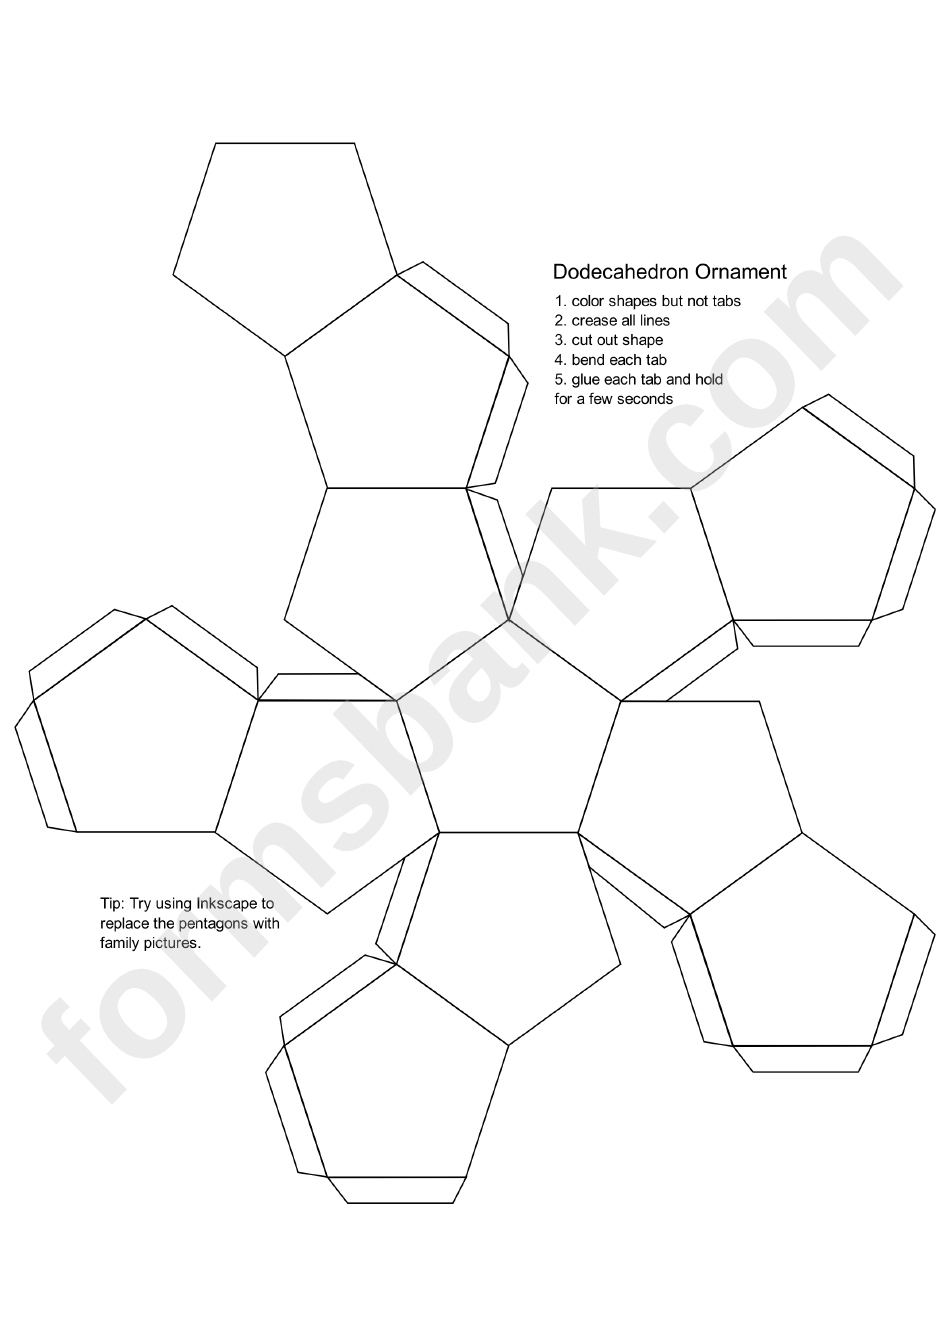 dodecahedron-ornament-printable-pdf-download